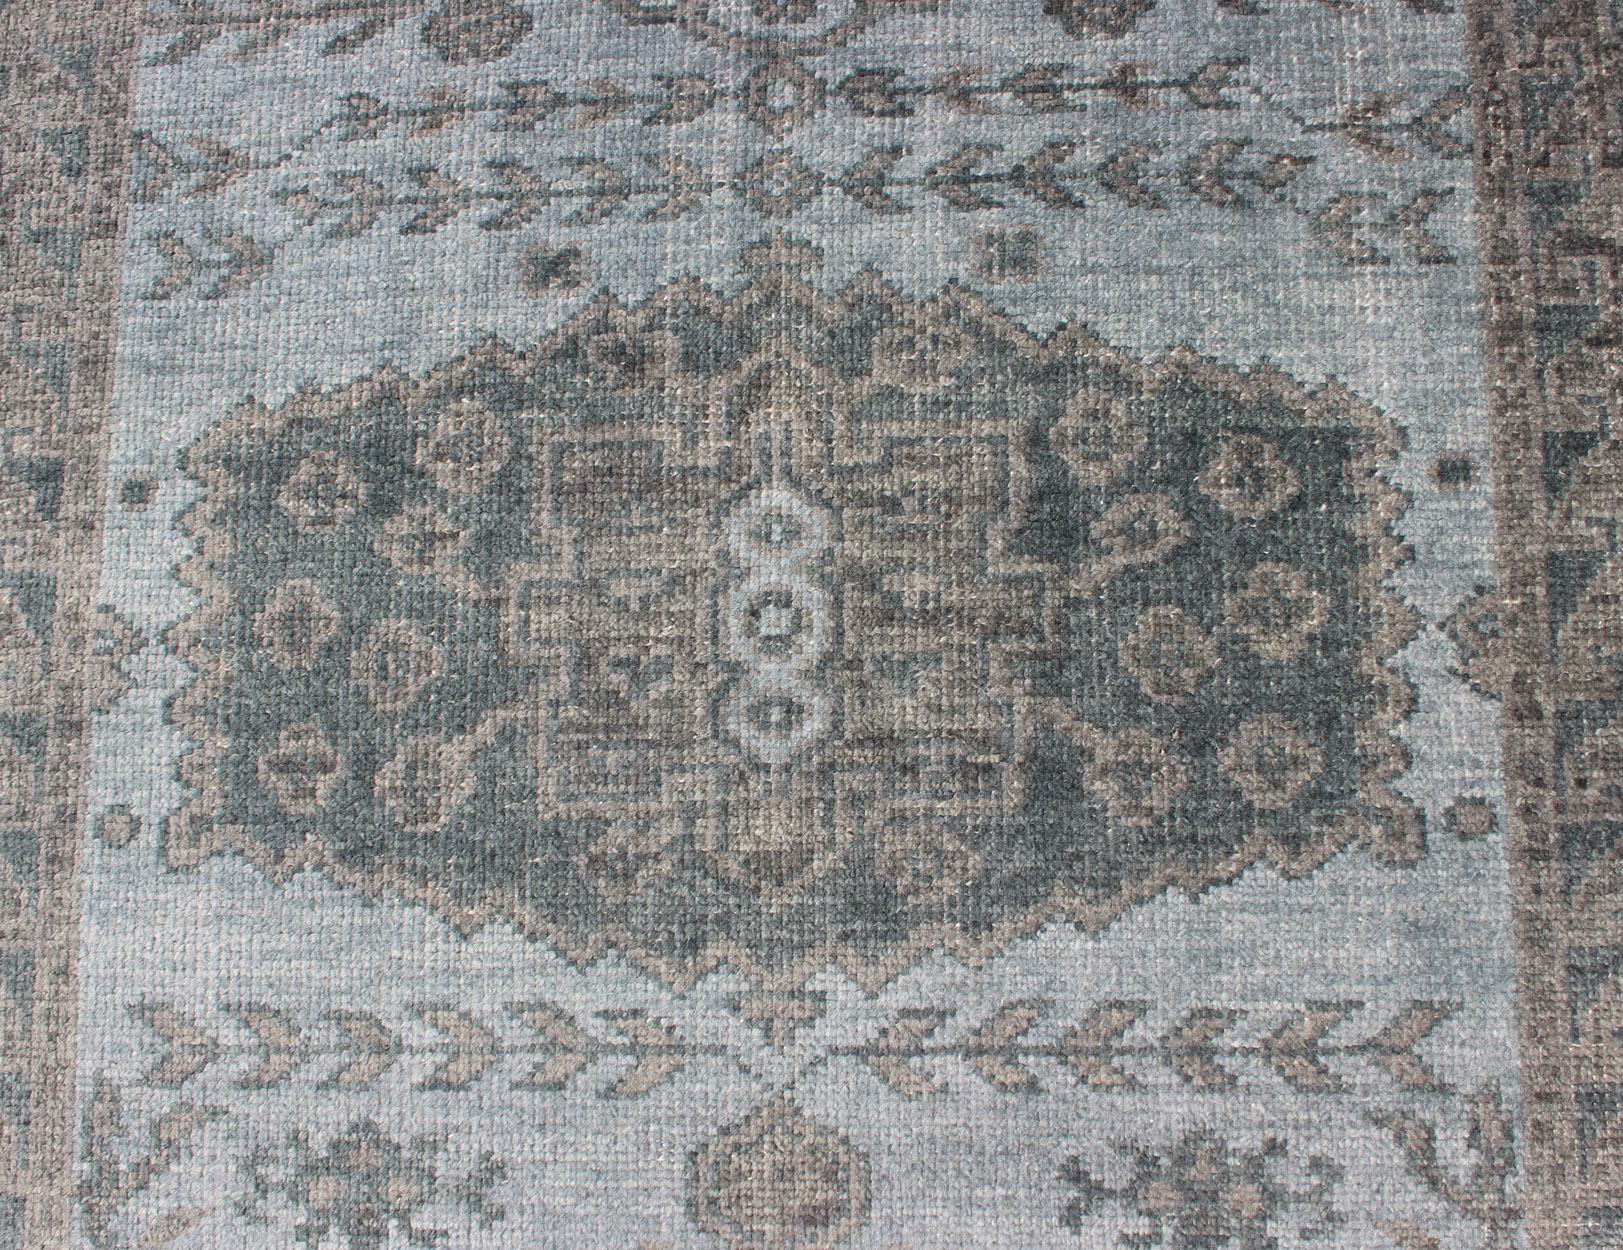 Oushak Design Distressed Rug in Gray, Taupe, & Cream with large Medallion Design 1